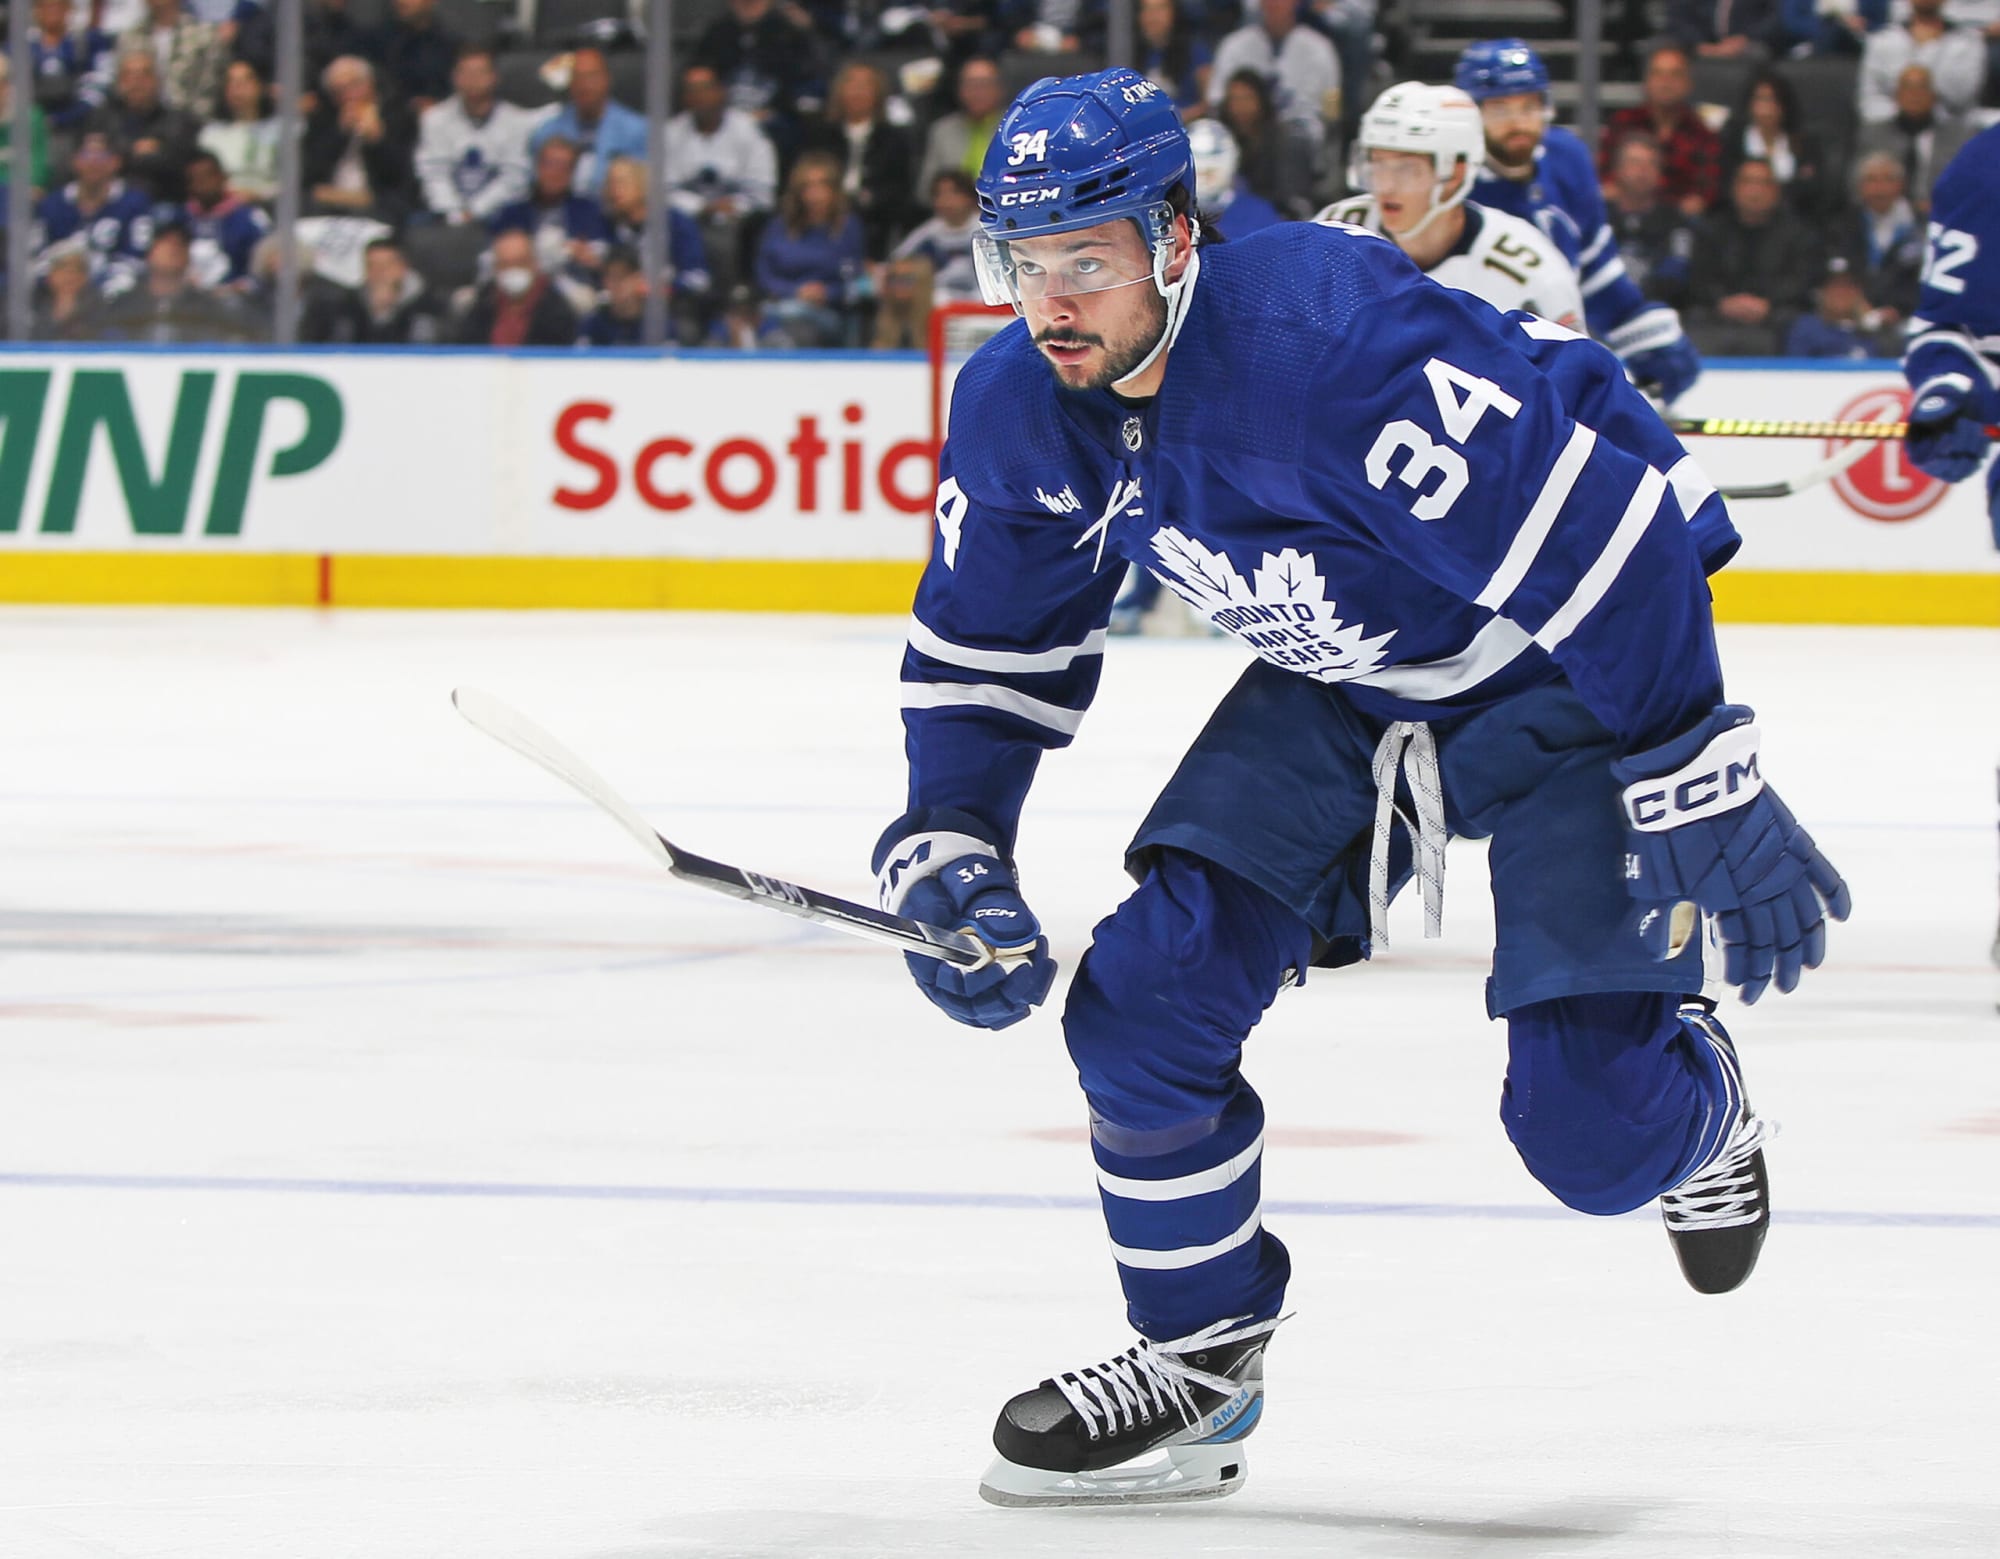 Auston Matthews Will be in Toronto Maple Leafs Top 5 All-Time